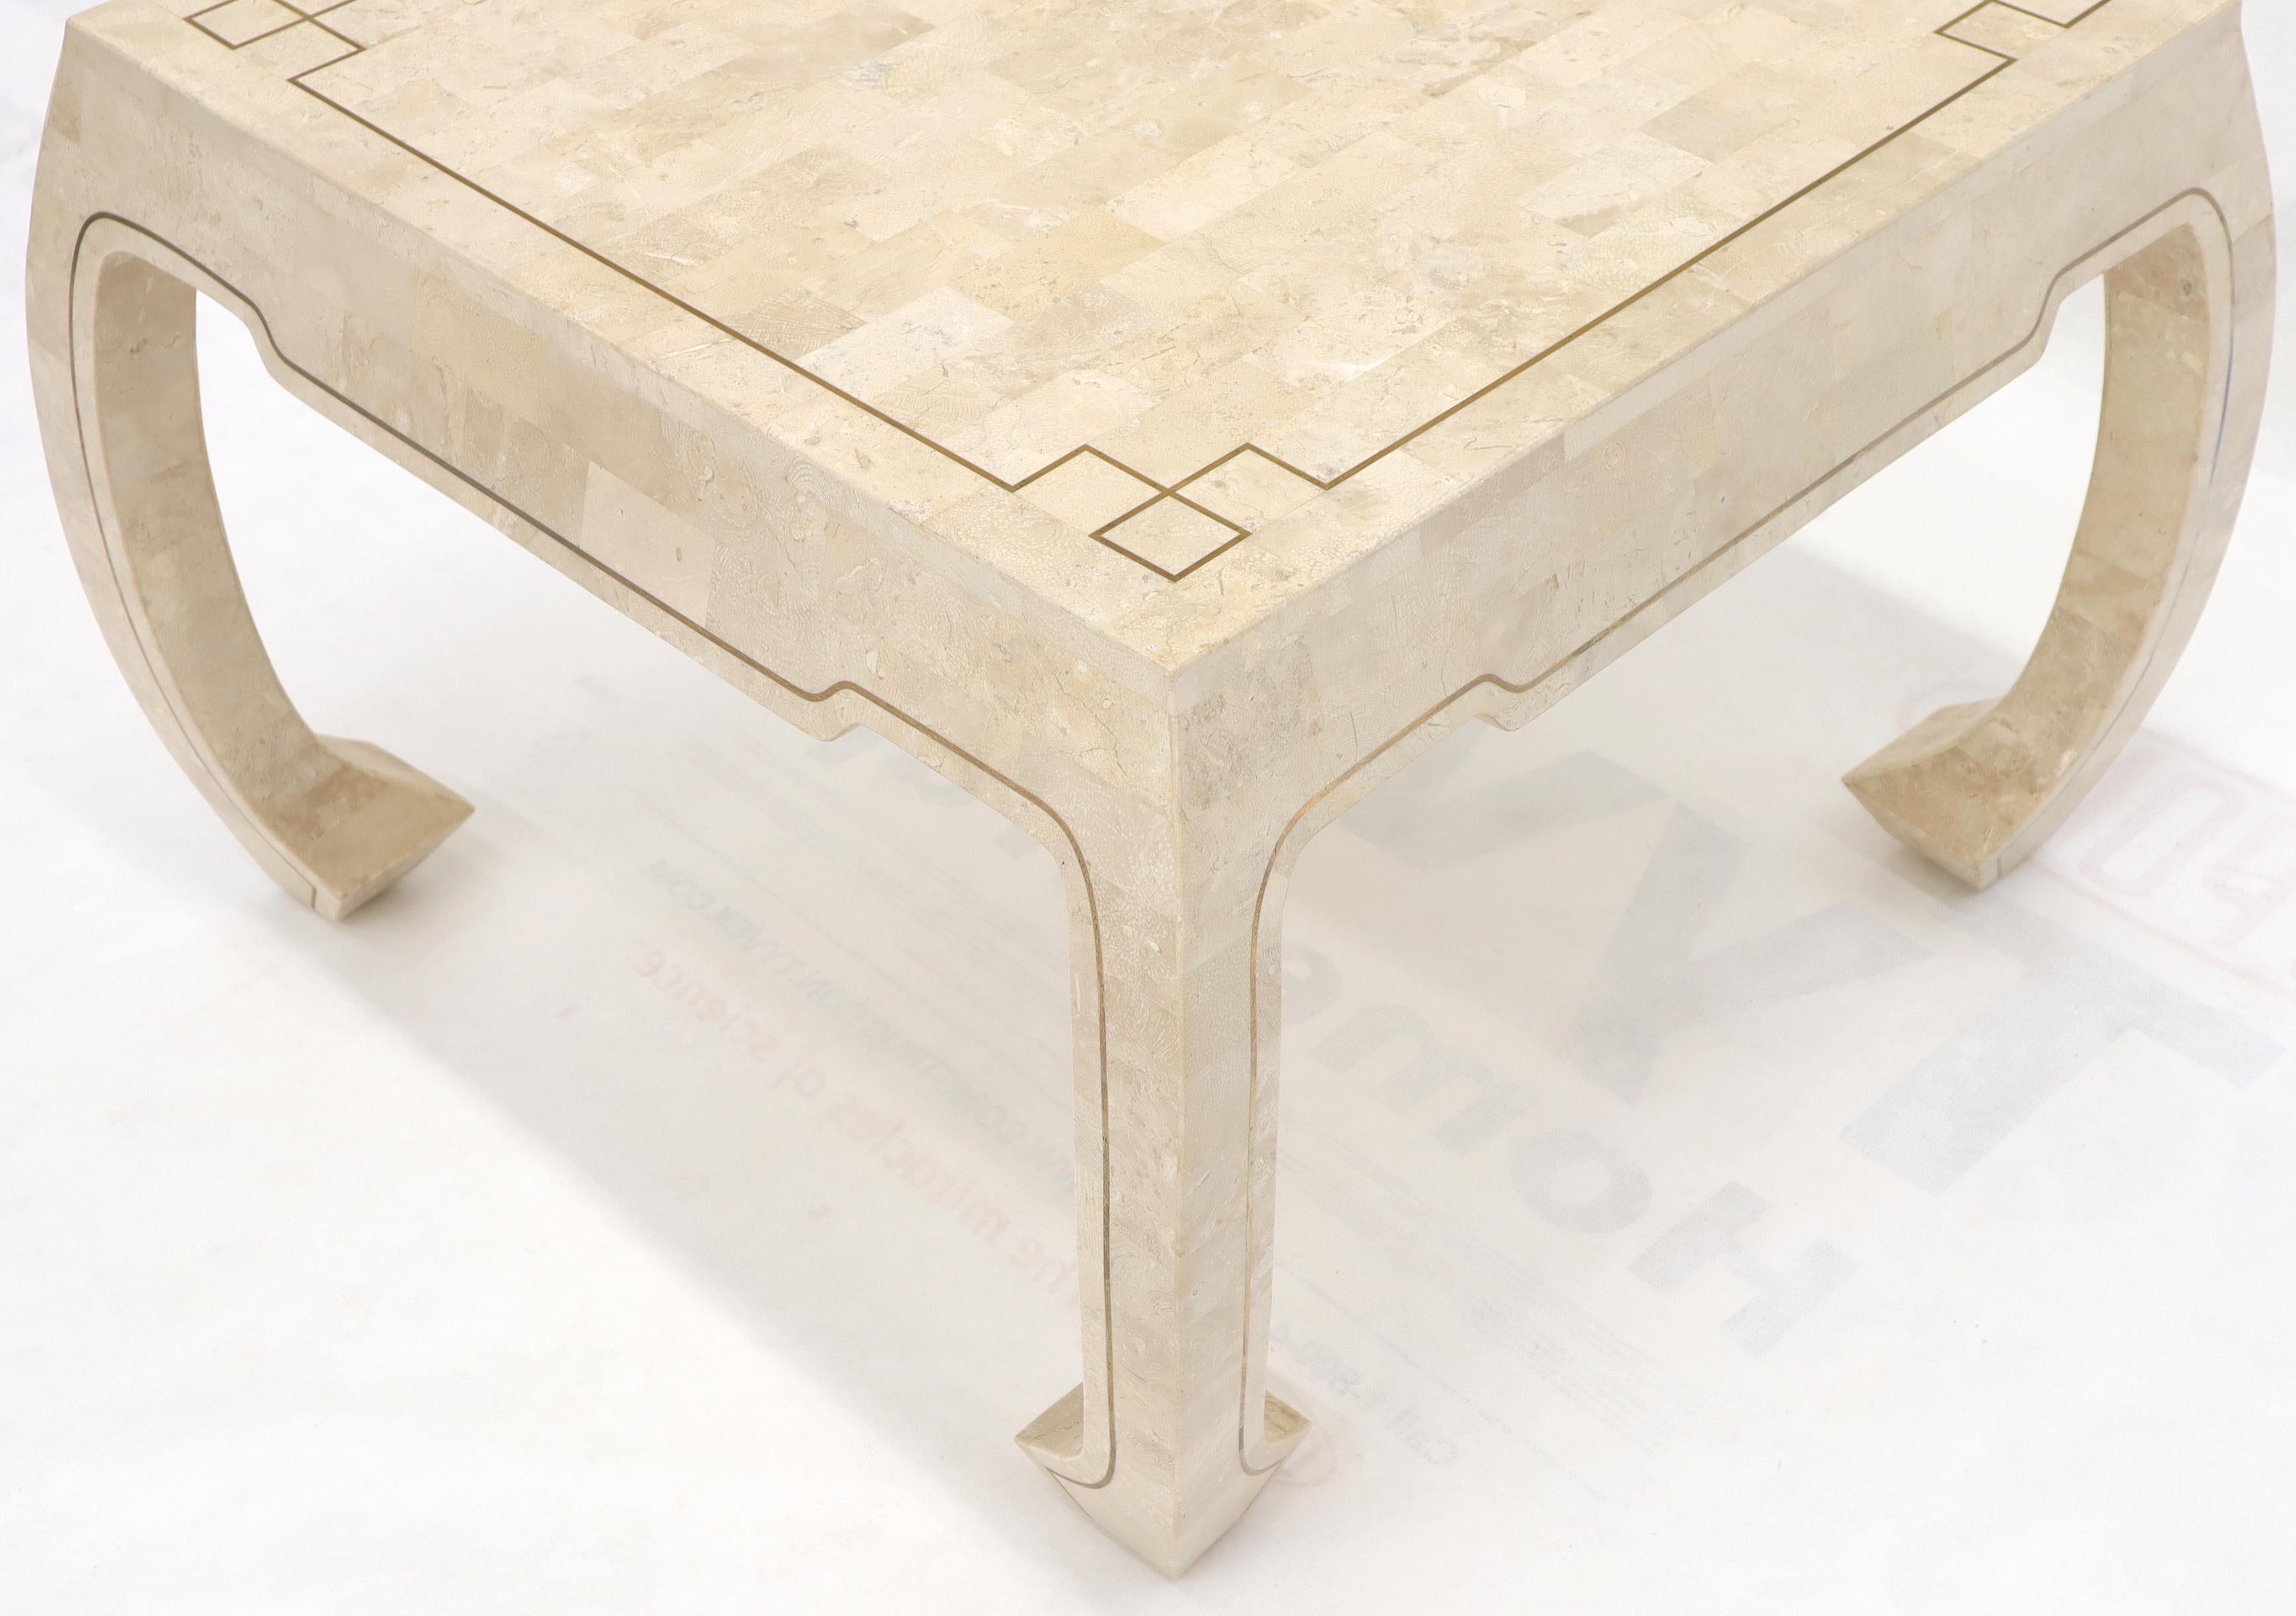 Tessellated Stone Veneer Brass Inlay Square Occasional Coffee Side Table In Distressed Condition For Sale In Rockaway, NJ